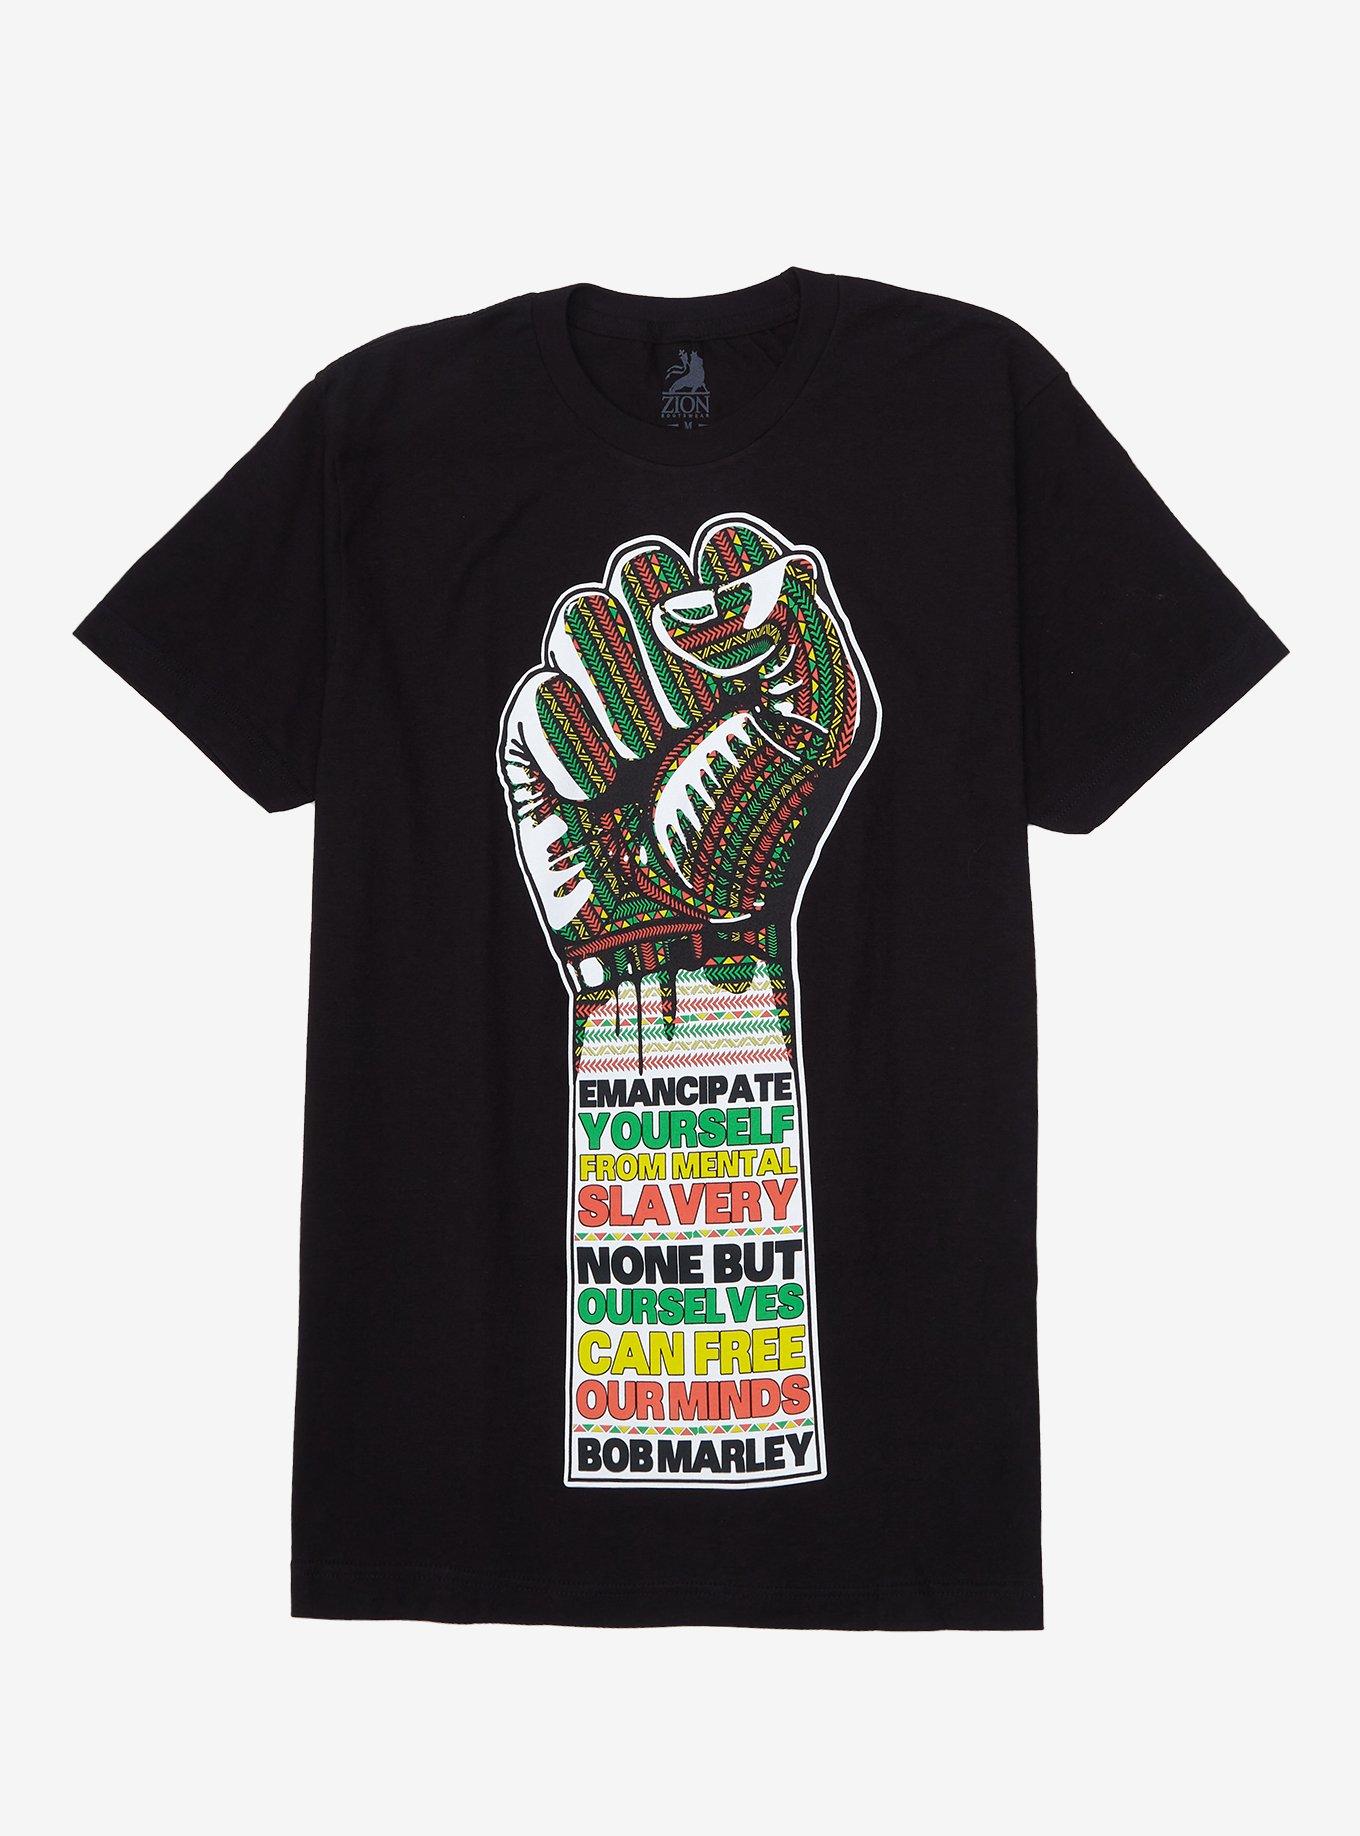 Bob Marley And The Wailers Redemption Song T-Shirt, BLACK, hi-res